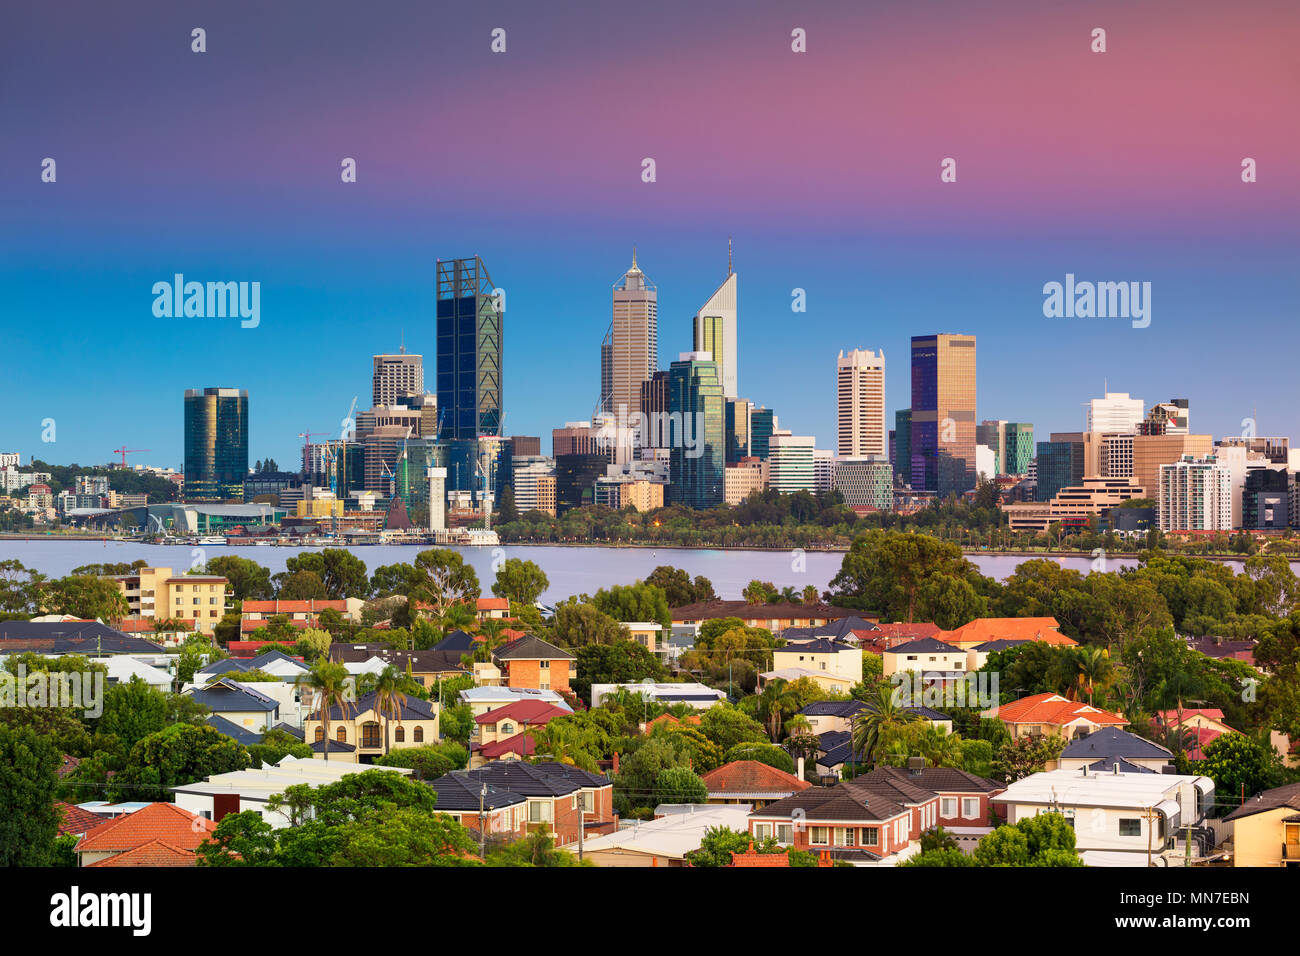 Perth. Cityscape image of Perth skyline, Australia during during sunrise taken from South Perth. Stock Photo